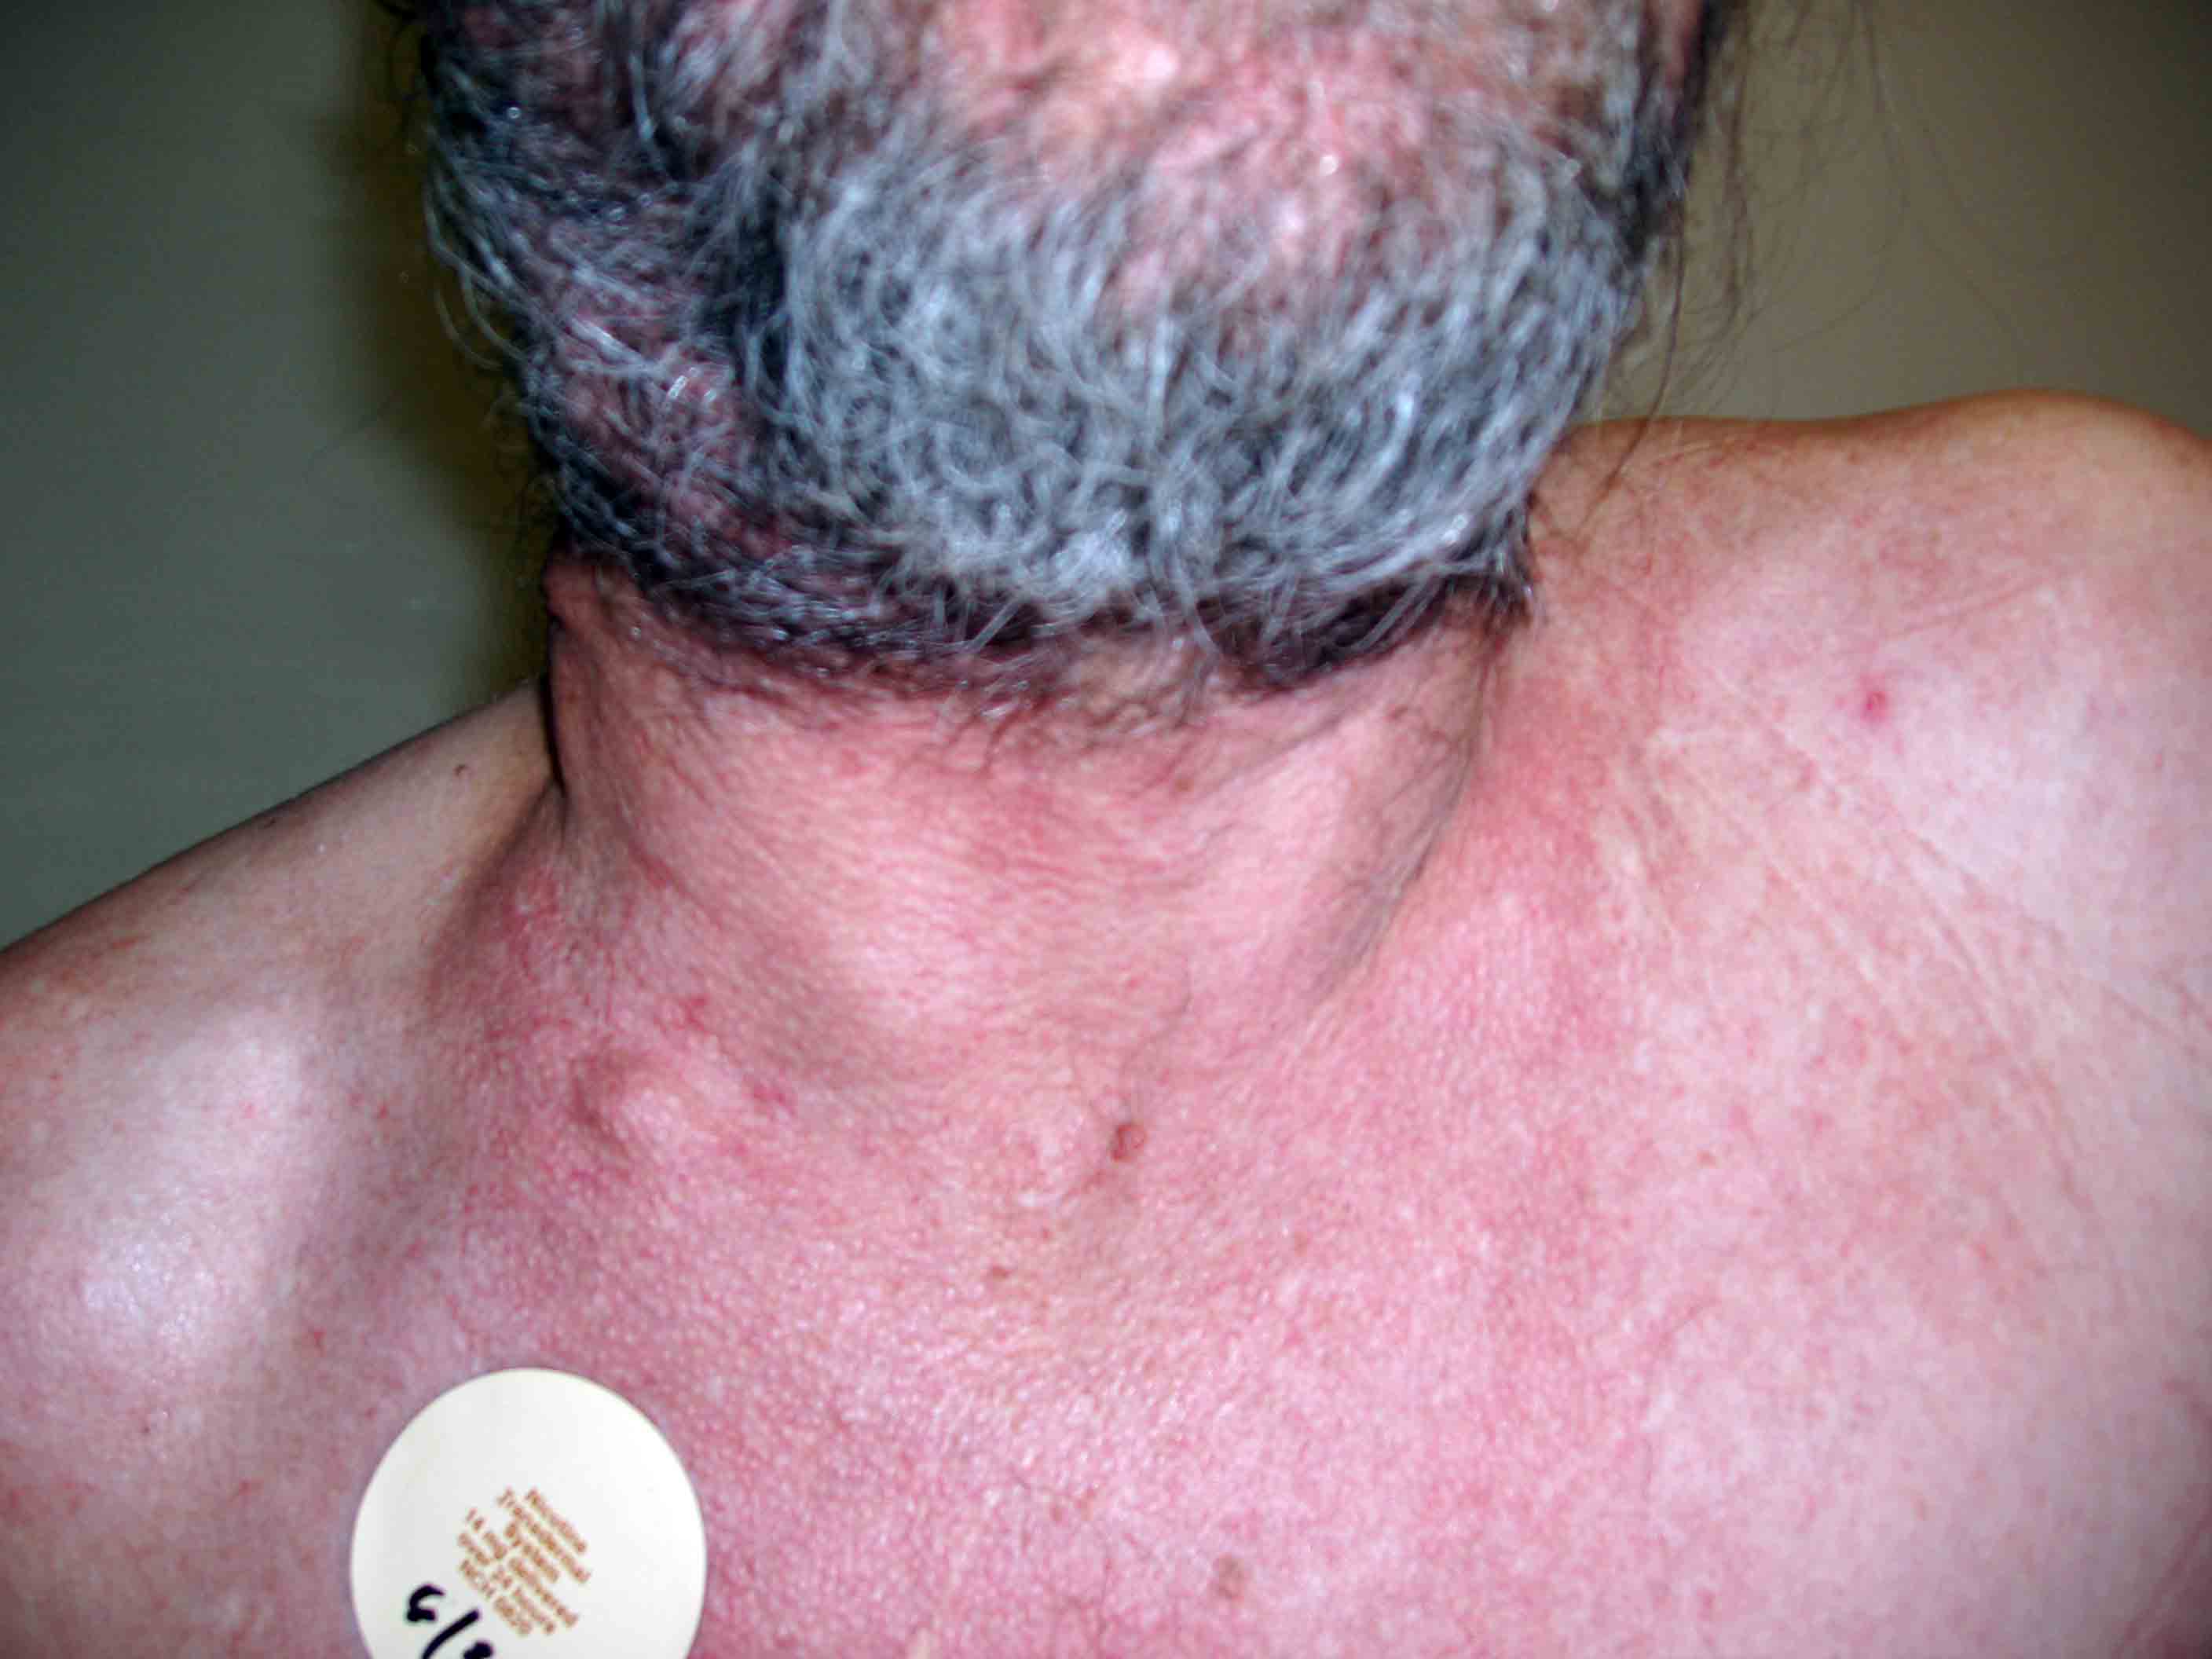 Cervical Adenopathy: multiple right sided cervical lymph nodes. Images Courtesy of Charlie Goldberg, M.D., UCSD School of Medicine and VA Medical Center, San Diego, CA.